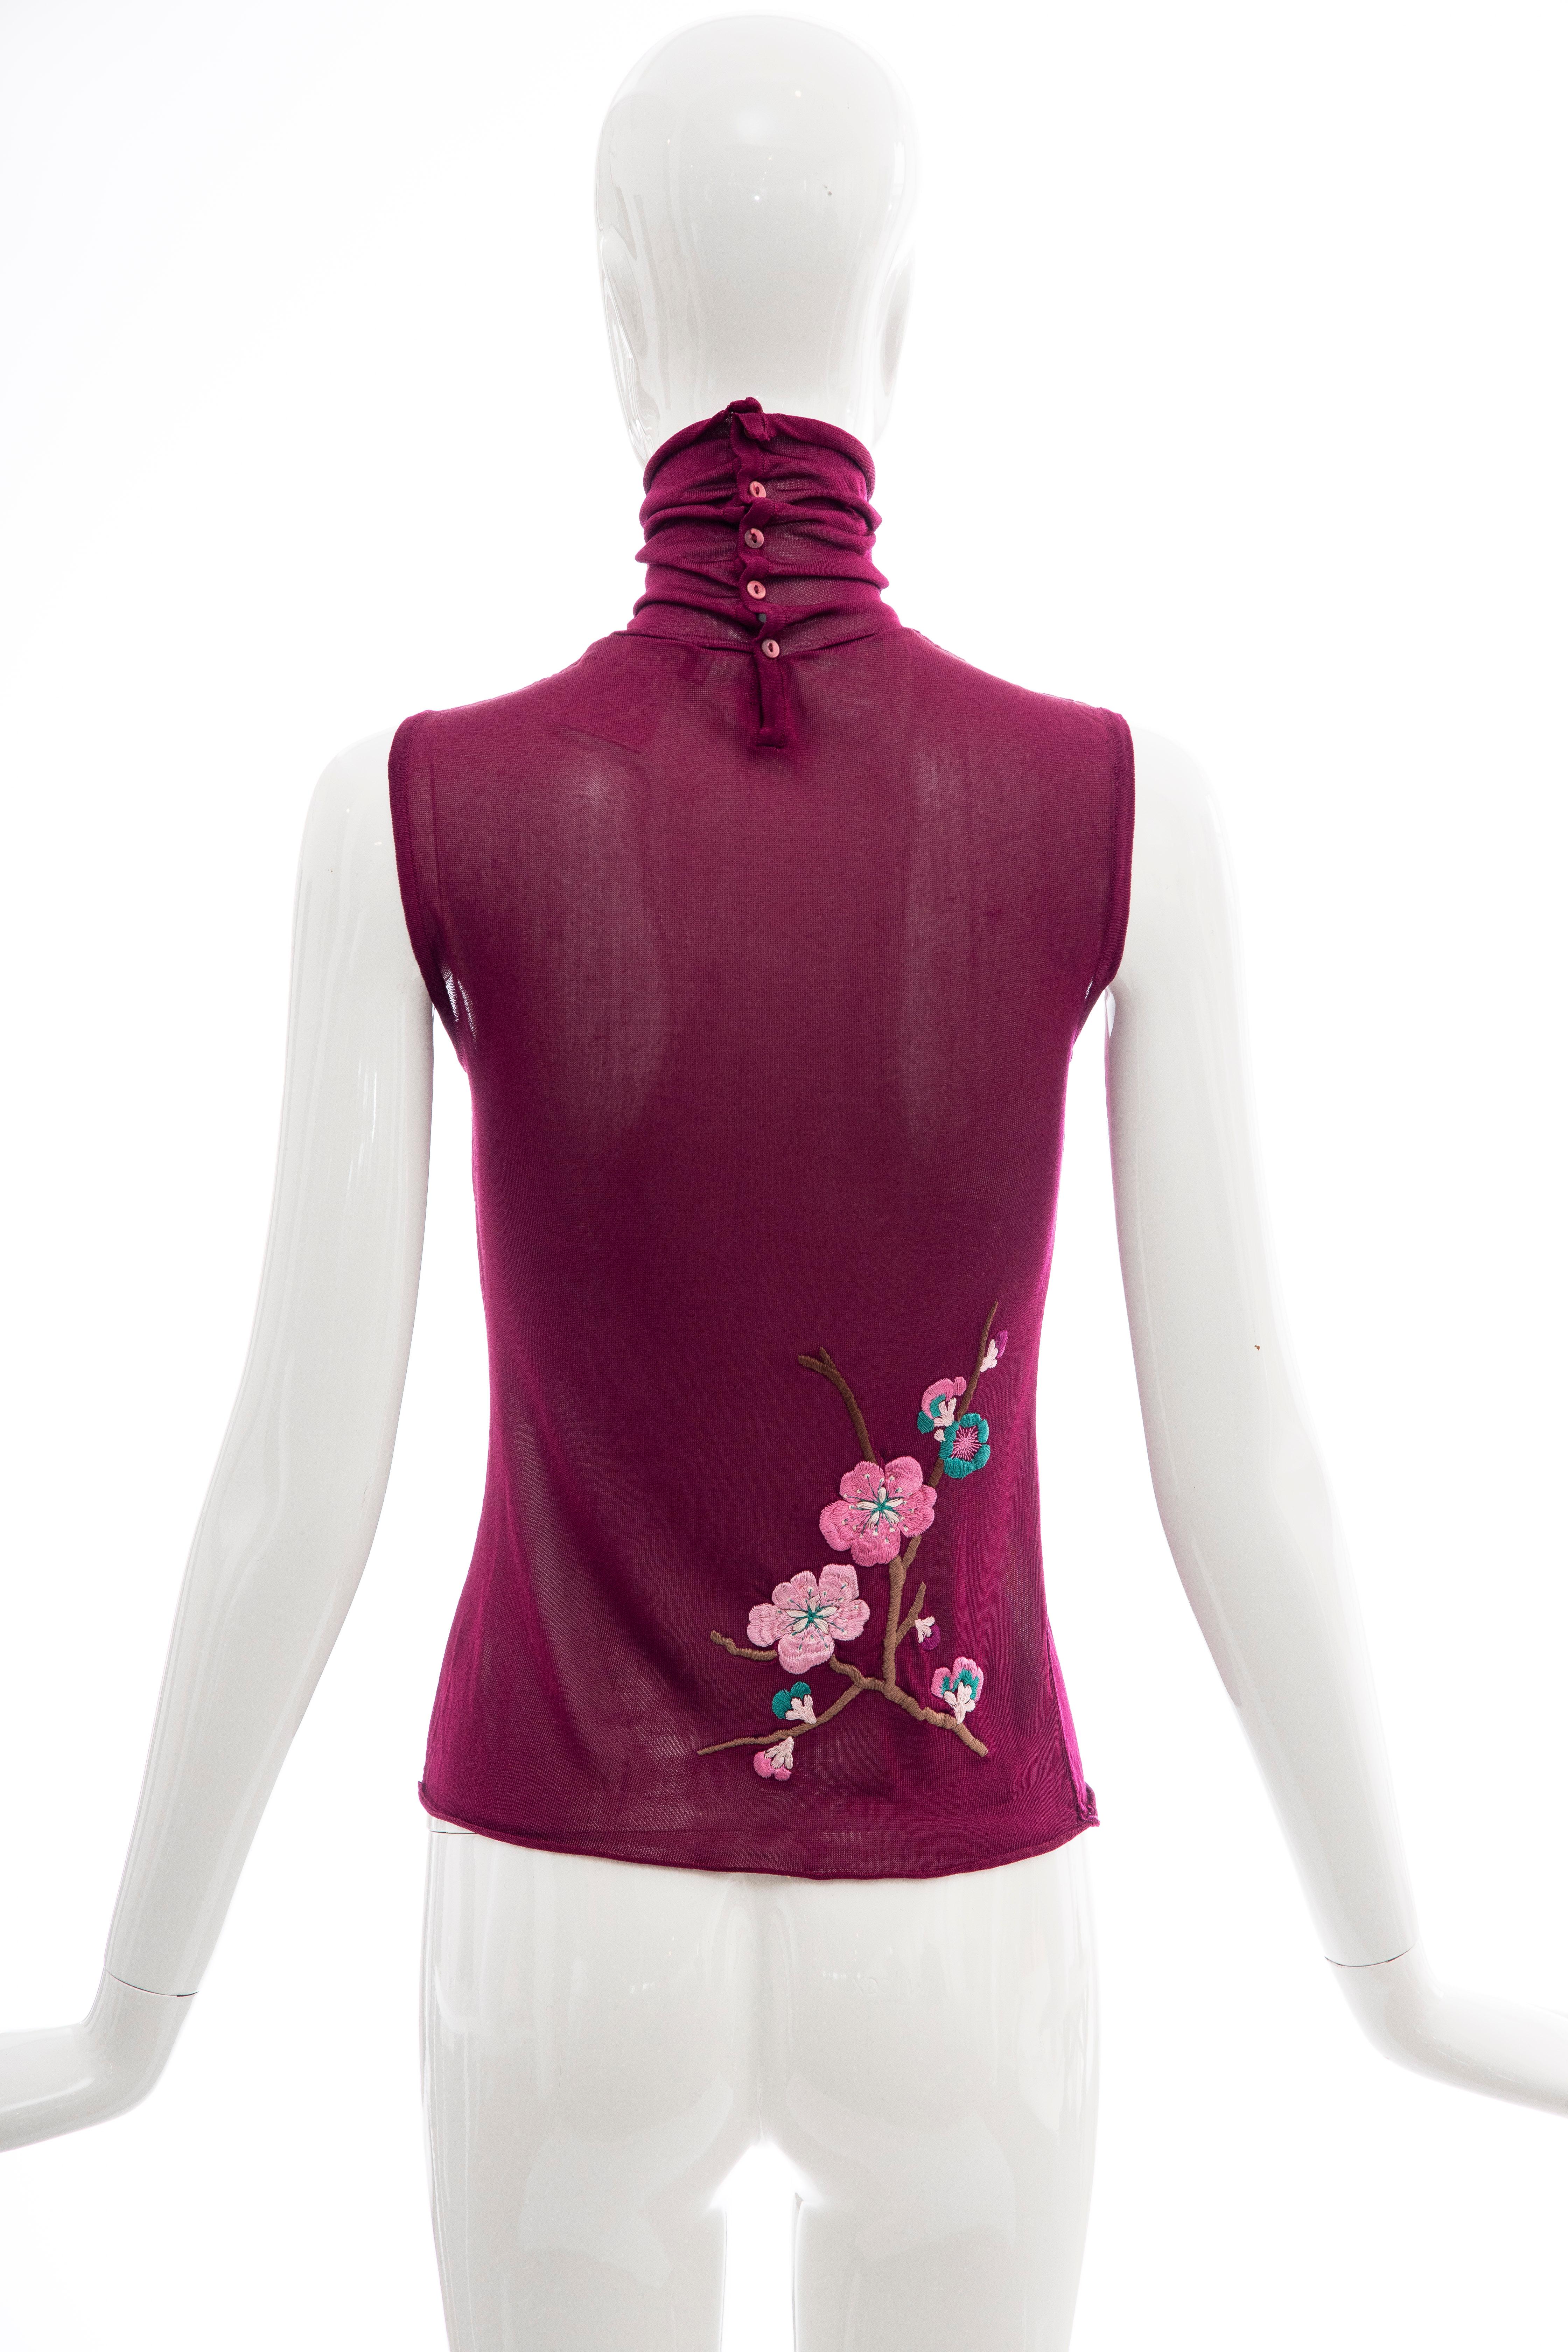 John Galliano for Christian Dior Embroidered Sleeveless Top, Fall 2003 1